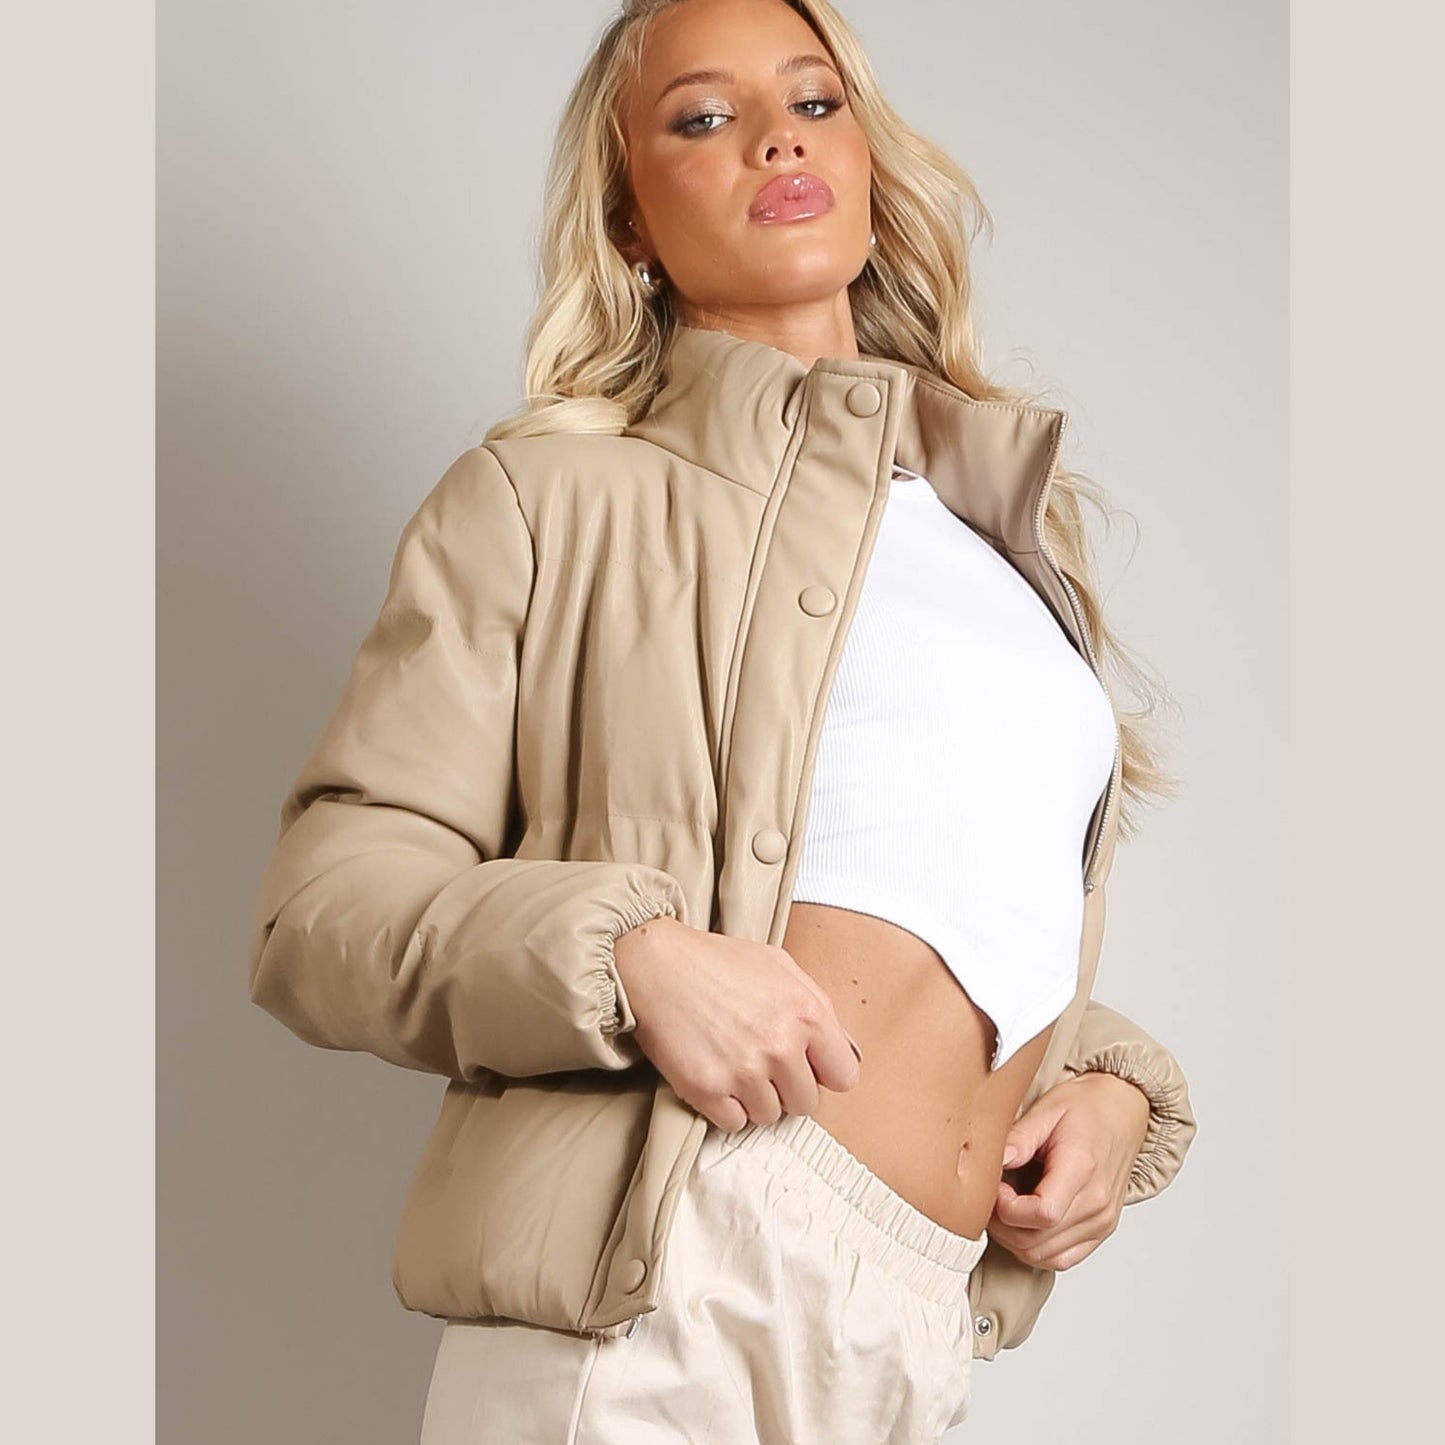 Women's Boxy Puffer Jacket - BeExtra! Apparel & More